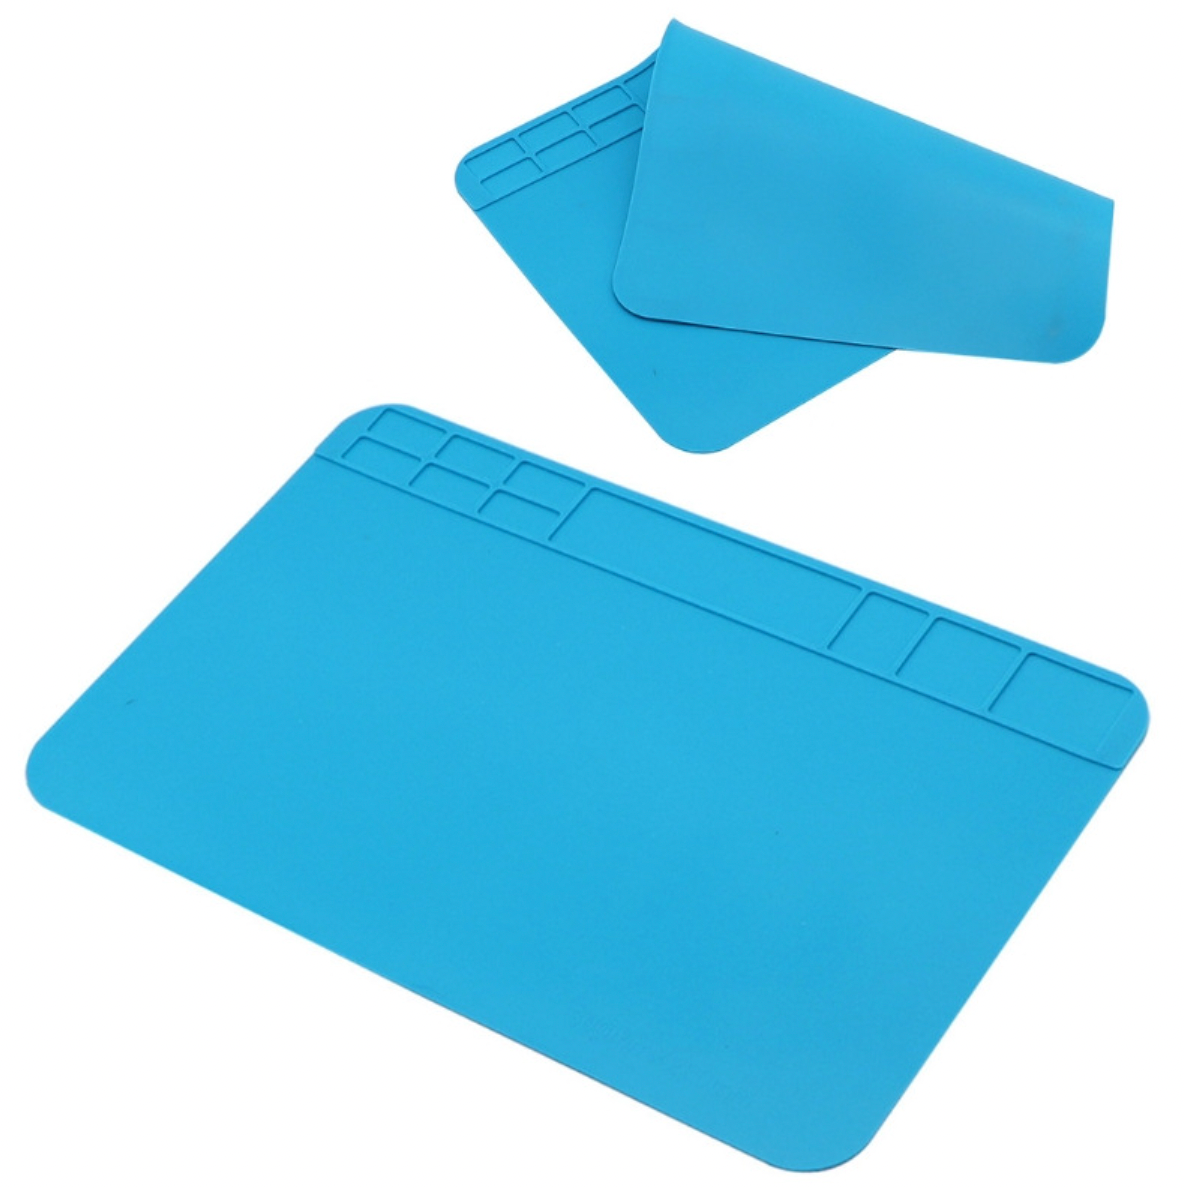 Phaser FPV Anti-Static Insulated Silicone Work Mat 300x200mm 80g